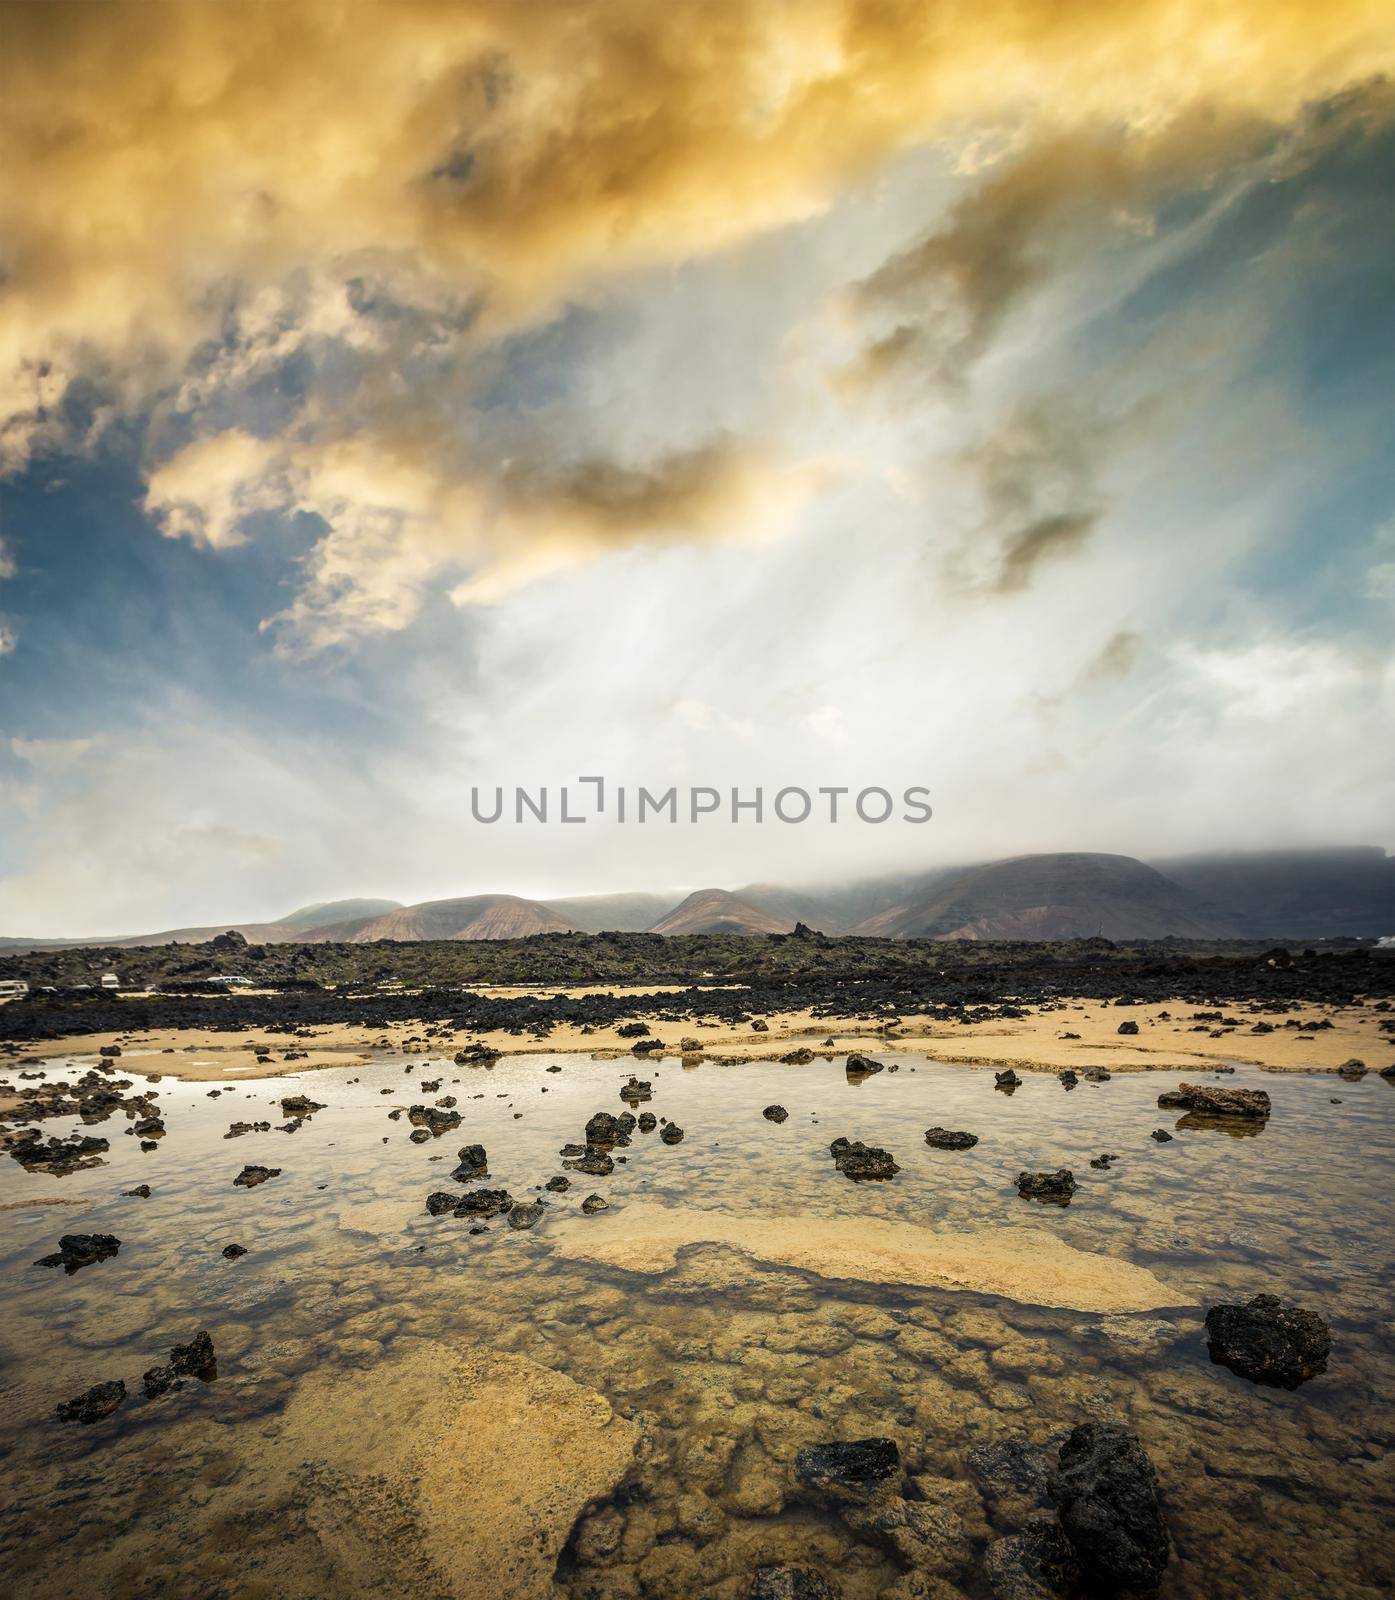 beautiful desert mountain landscape with water on the island of Lanzarote, Canary Islands